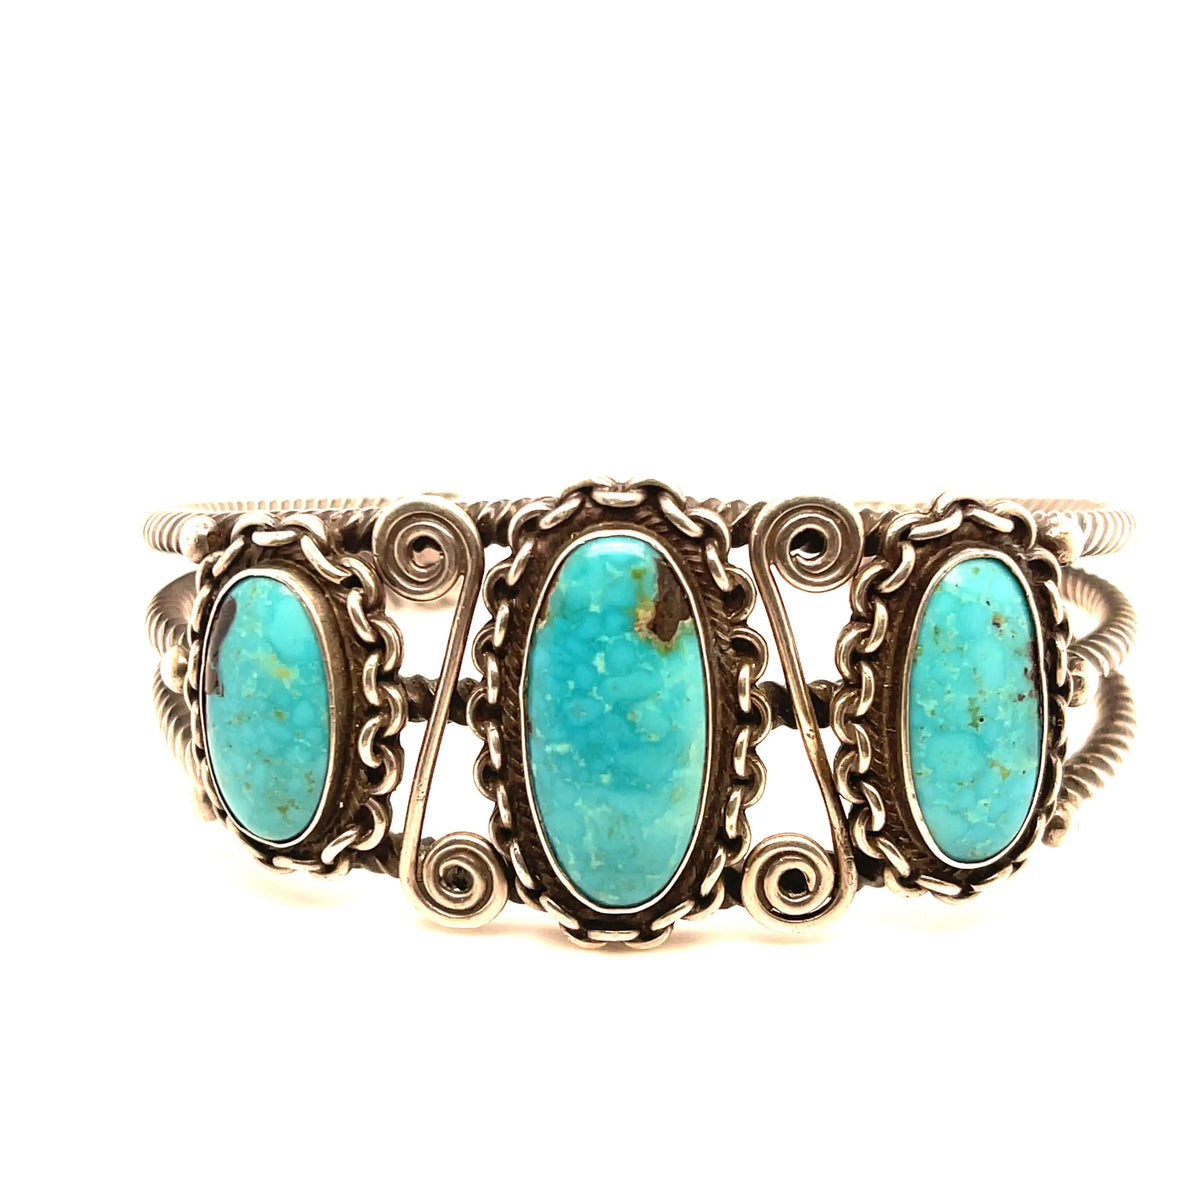 1920s Ingot 3 Stone Turquoise Bracelet  Dimensions: Opennings 1.1 inches and circumference 2.5 inches  NOTE: Please bear that in mind that, when you purchase vintage, it might not be perfect, but it will be authentic. Please contact shop@sbvail.com if you have additional questions about the nature and condition of the product.